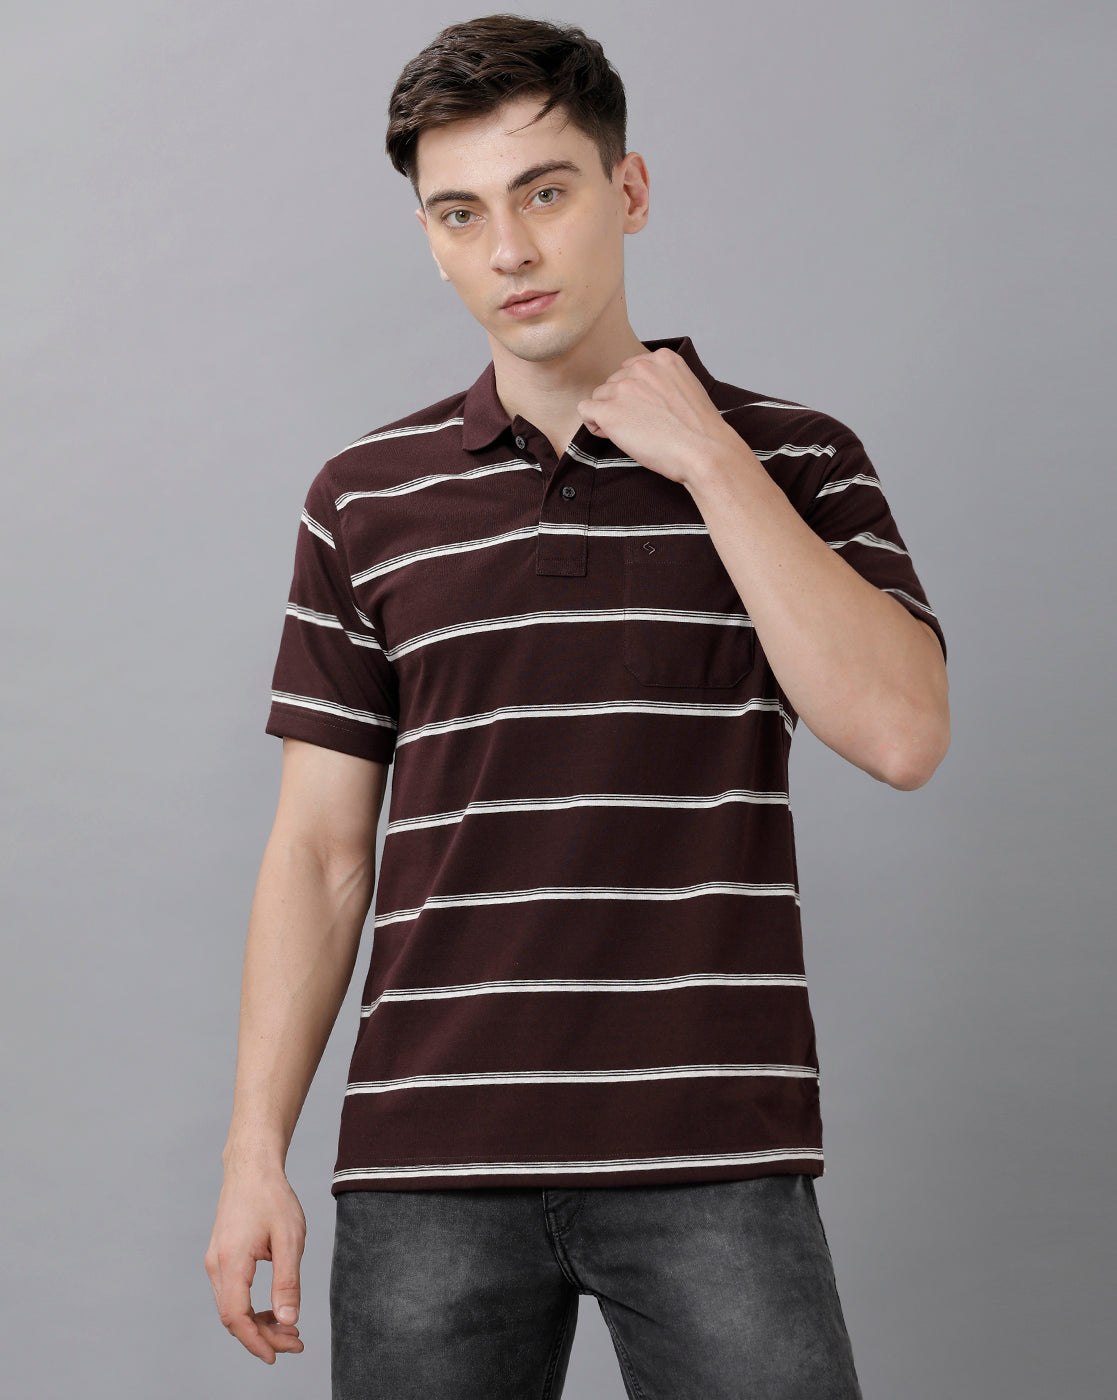 Classic Polo Mens Cotton Blend Striped Half Sleeve Authentic Fit Polo Neck Dark Brown Color T-Shirt | Avon 504 B